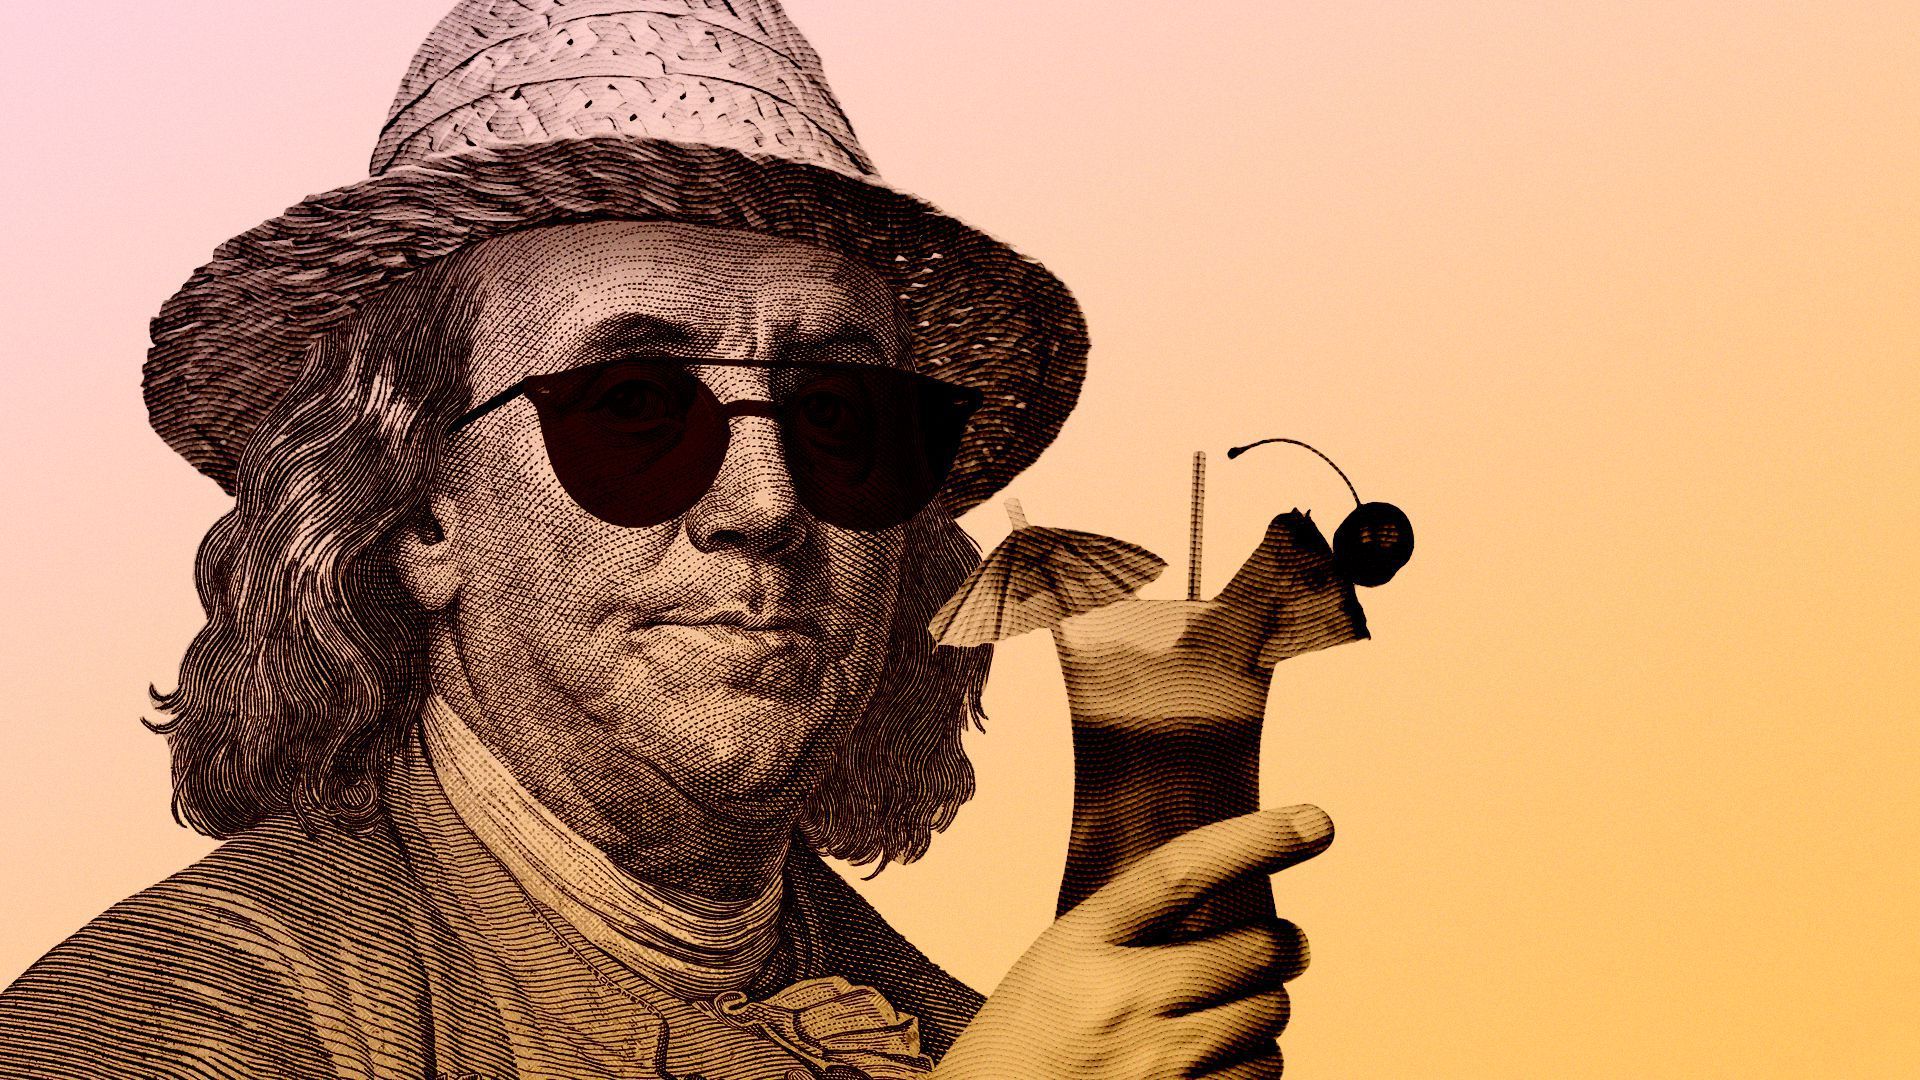 illustration of Ben Franklin wearing sunglasses sipping on a fruity drink